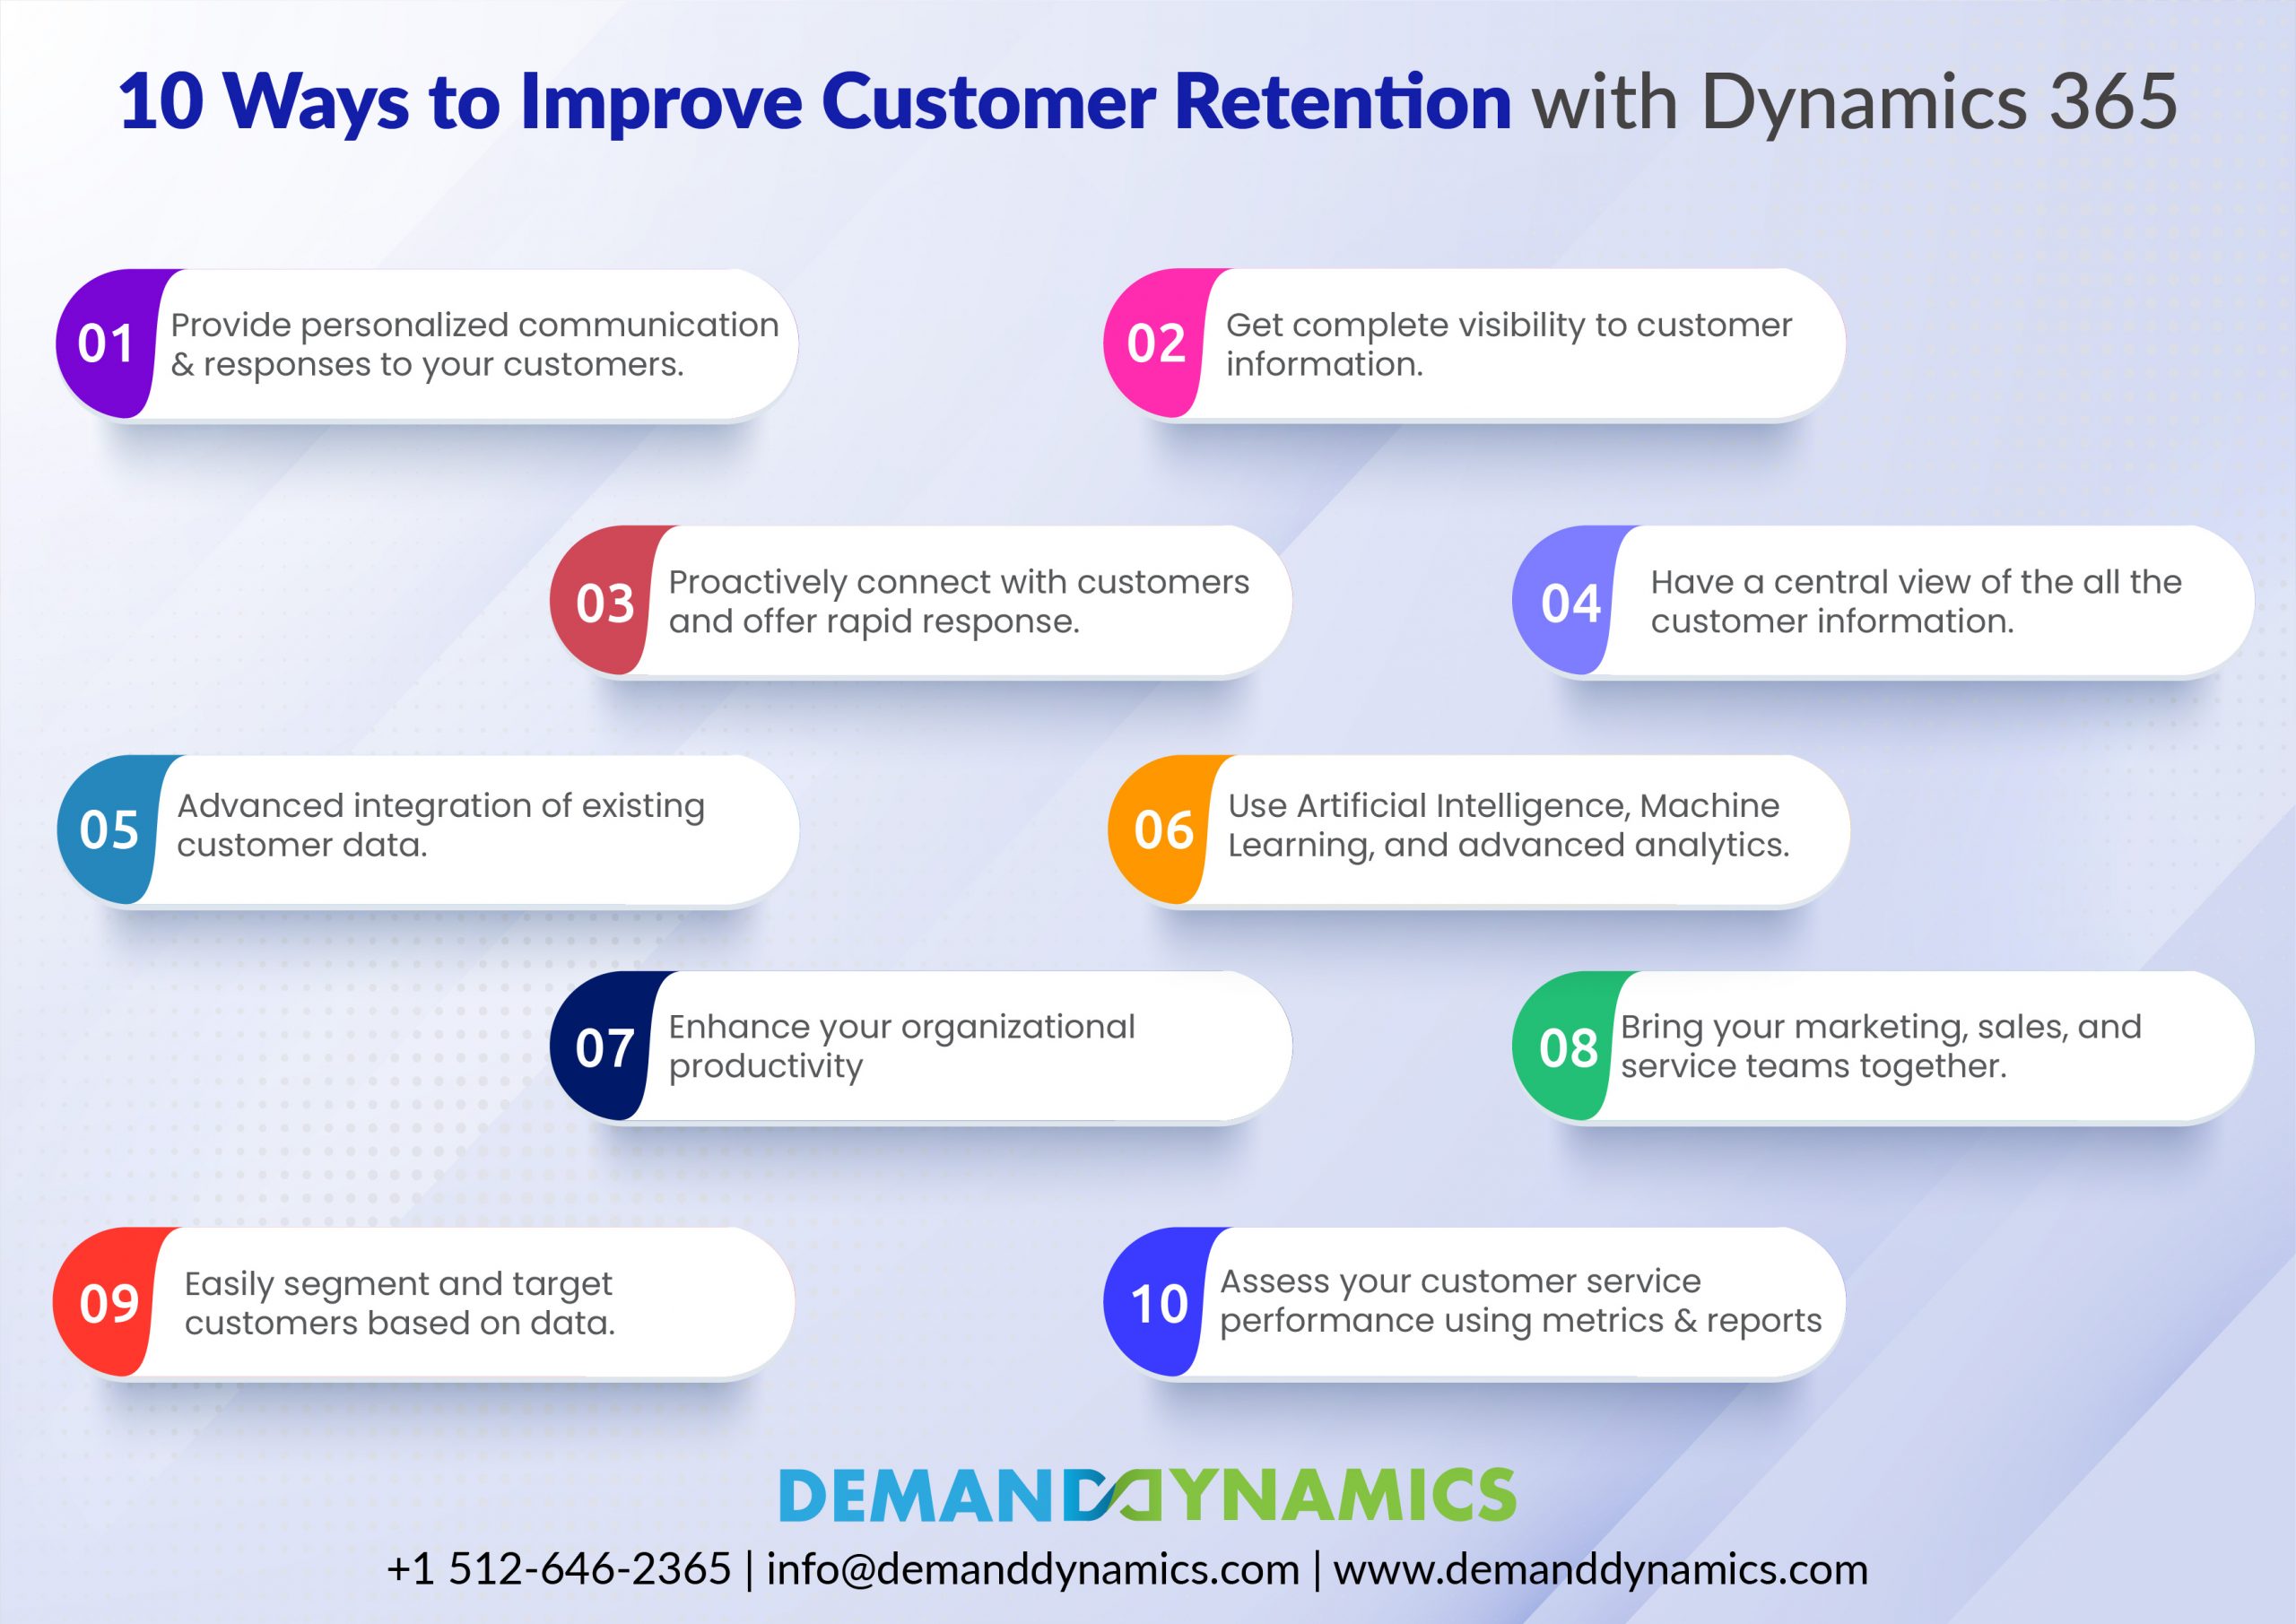 Improve Customer Retention with Dynamics 365